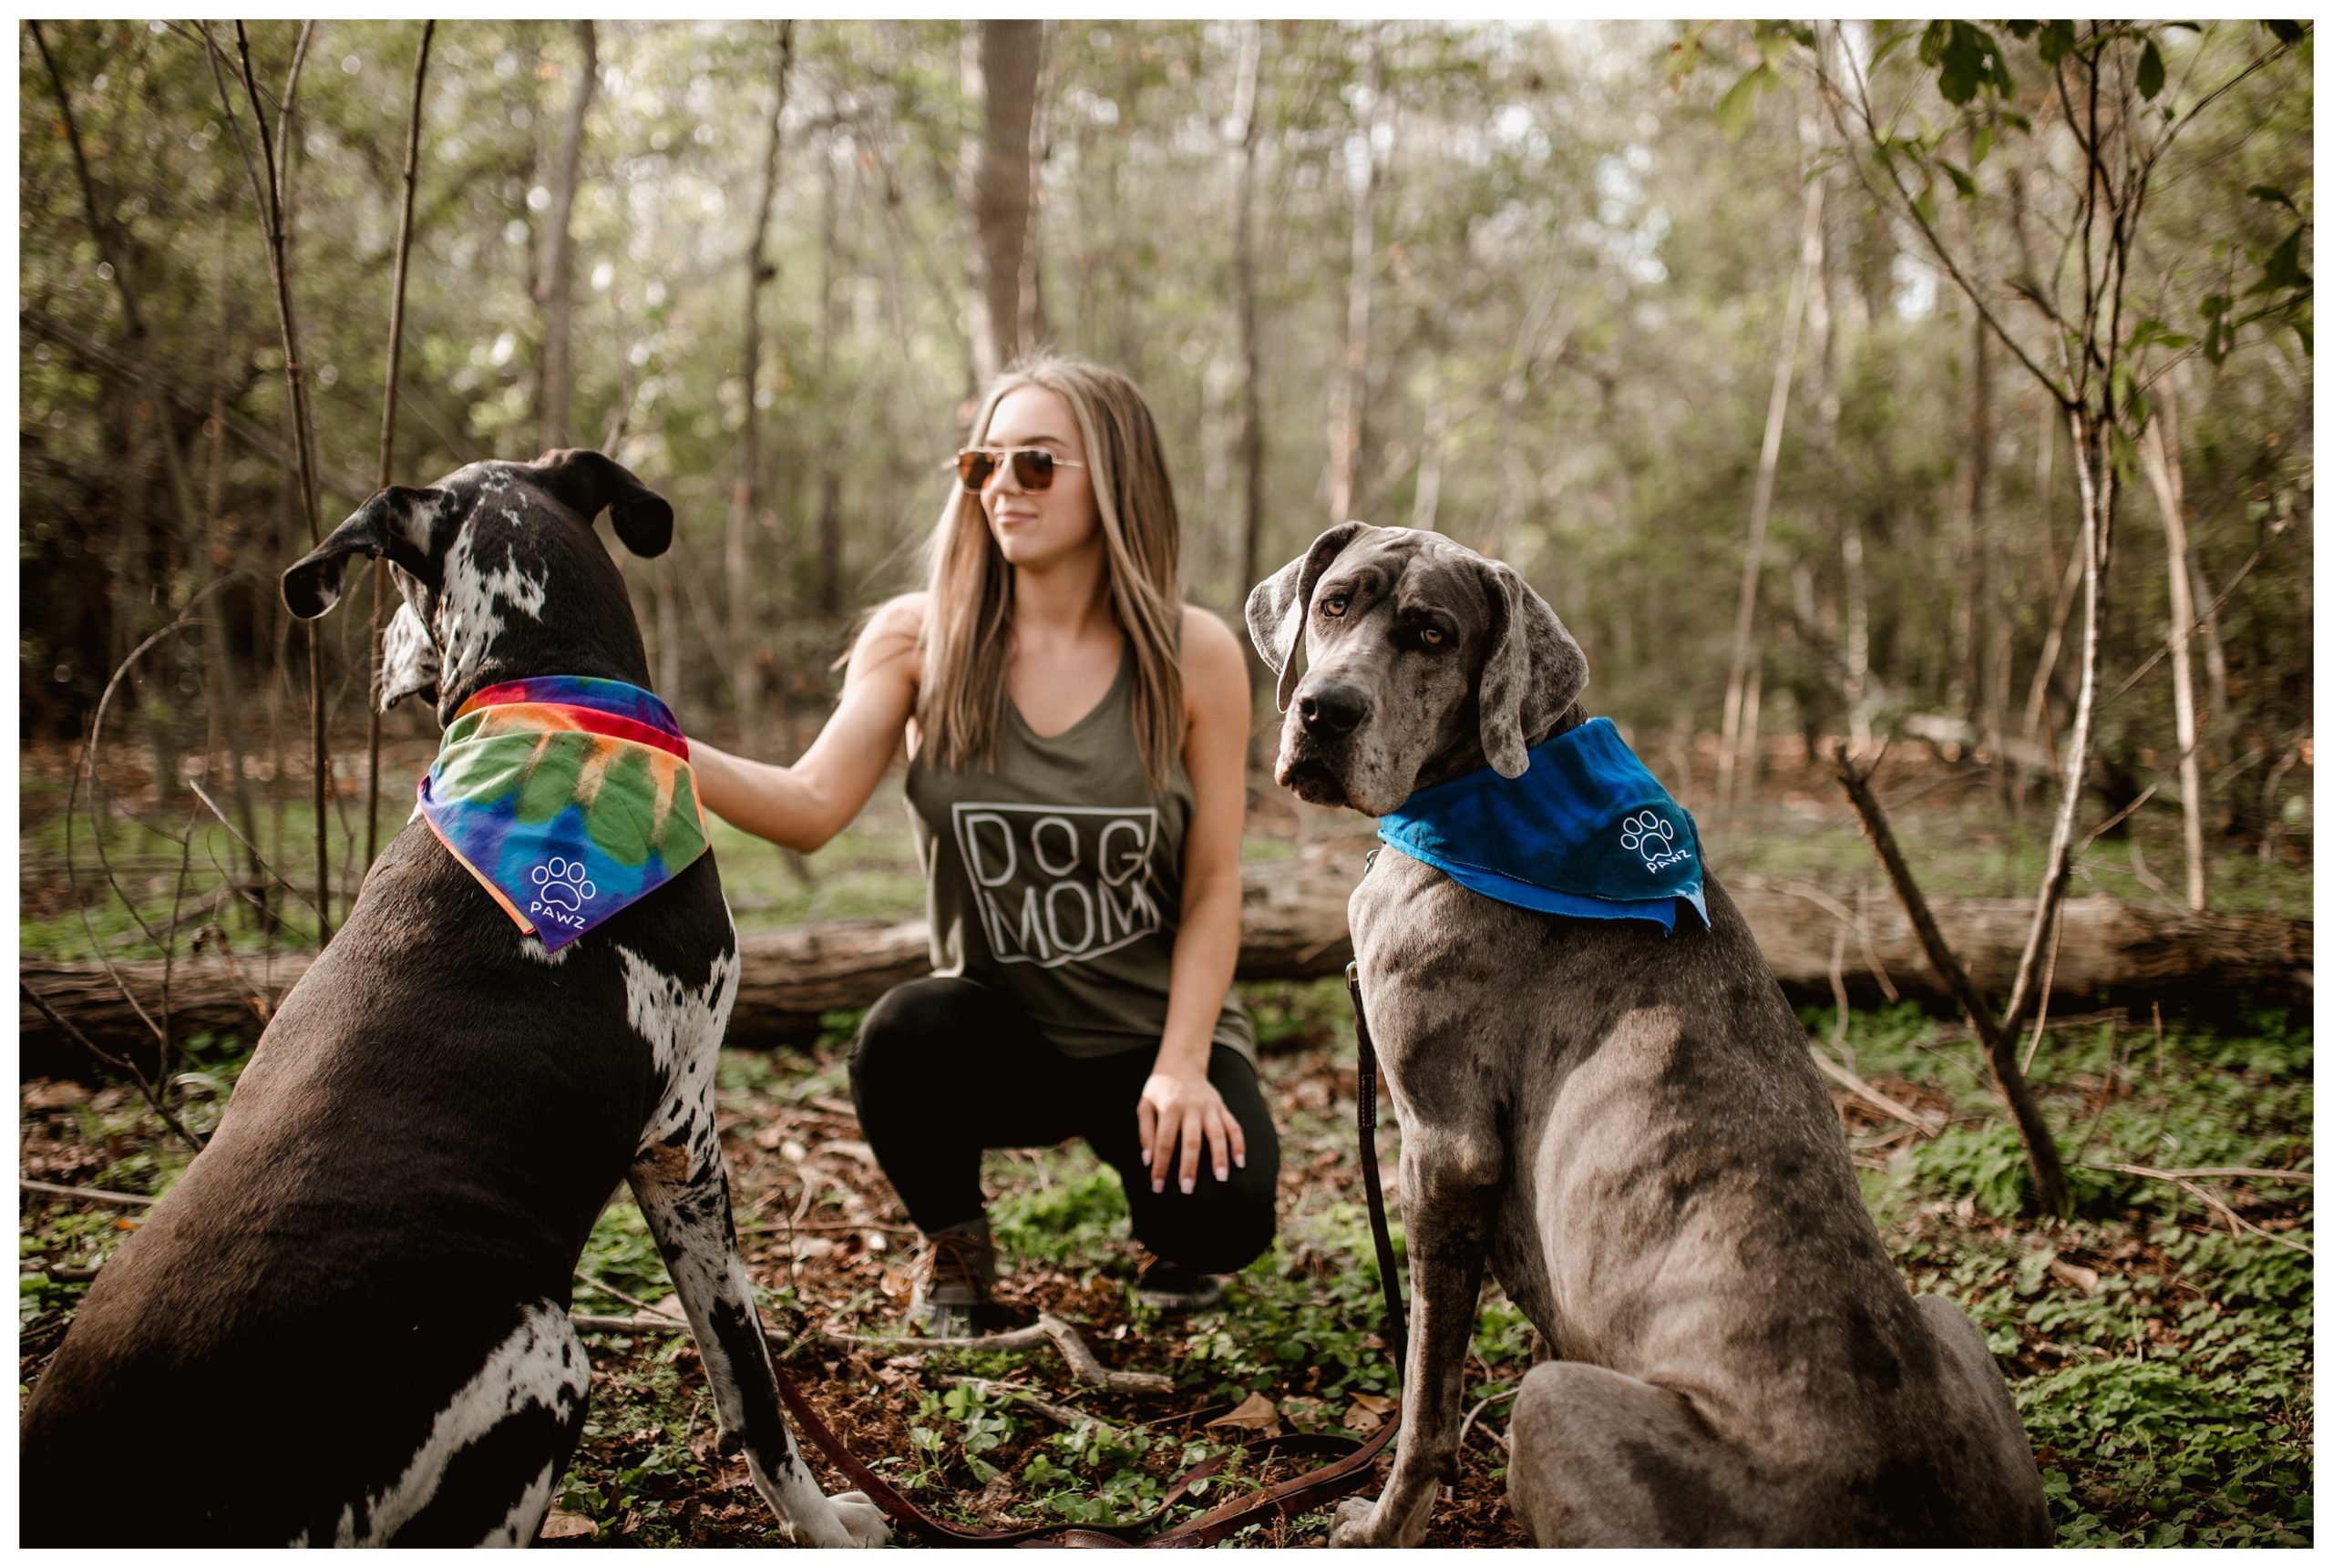 Pet and owner photography in nature, the dogs favorite place to be!